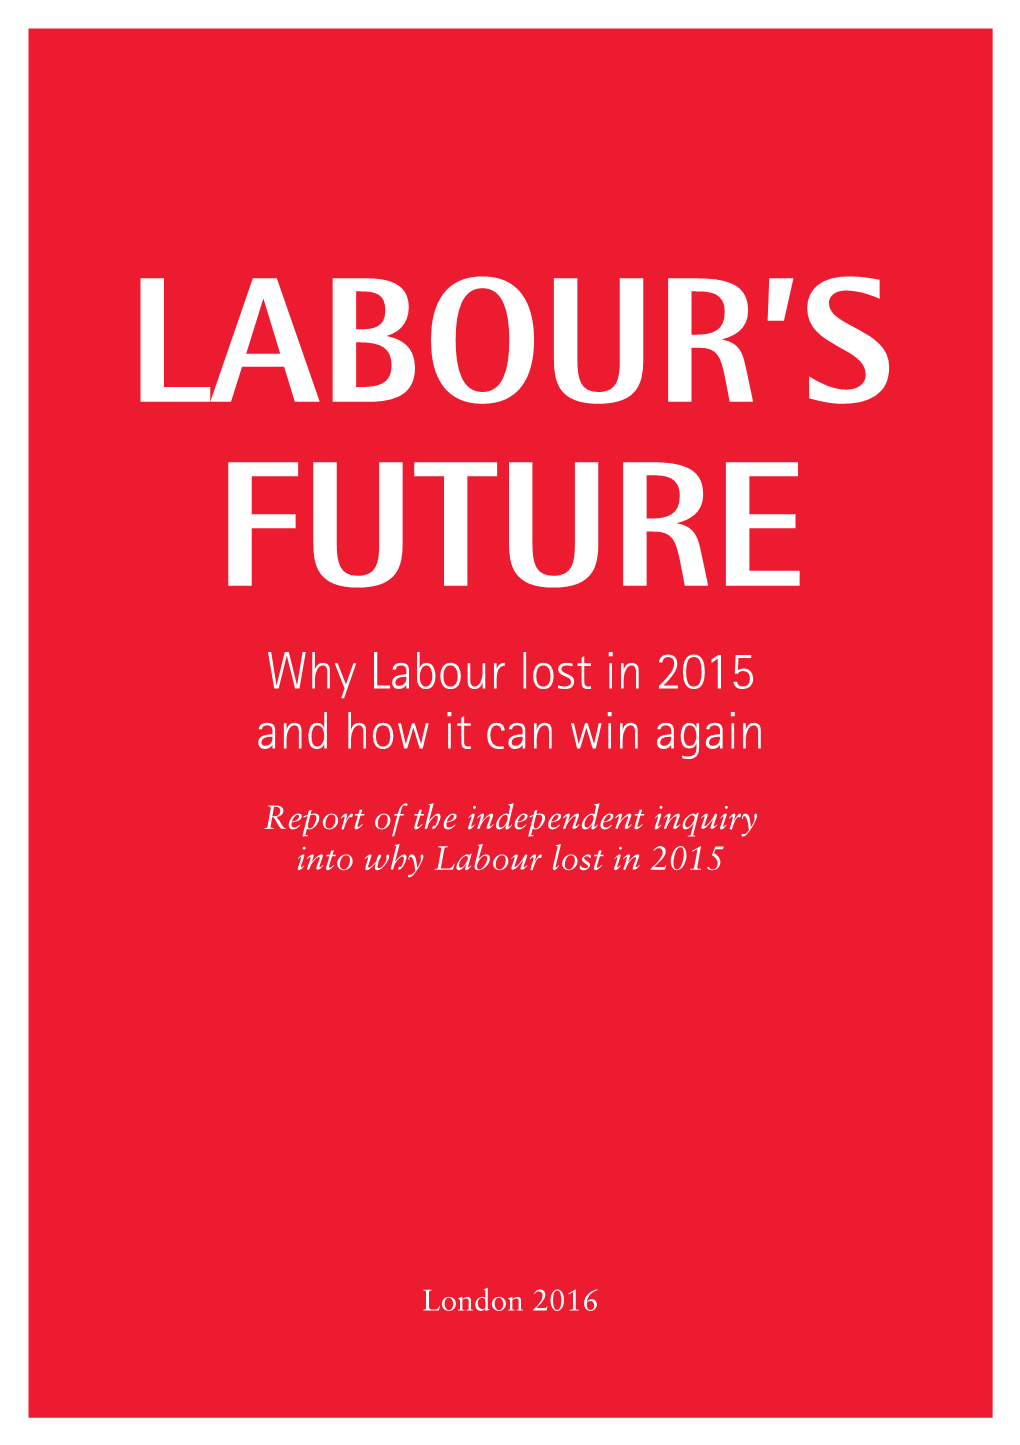 Why Labour Lost in 2015 and How It Can Win Again